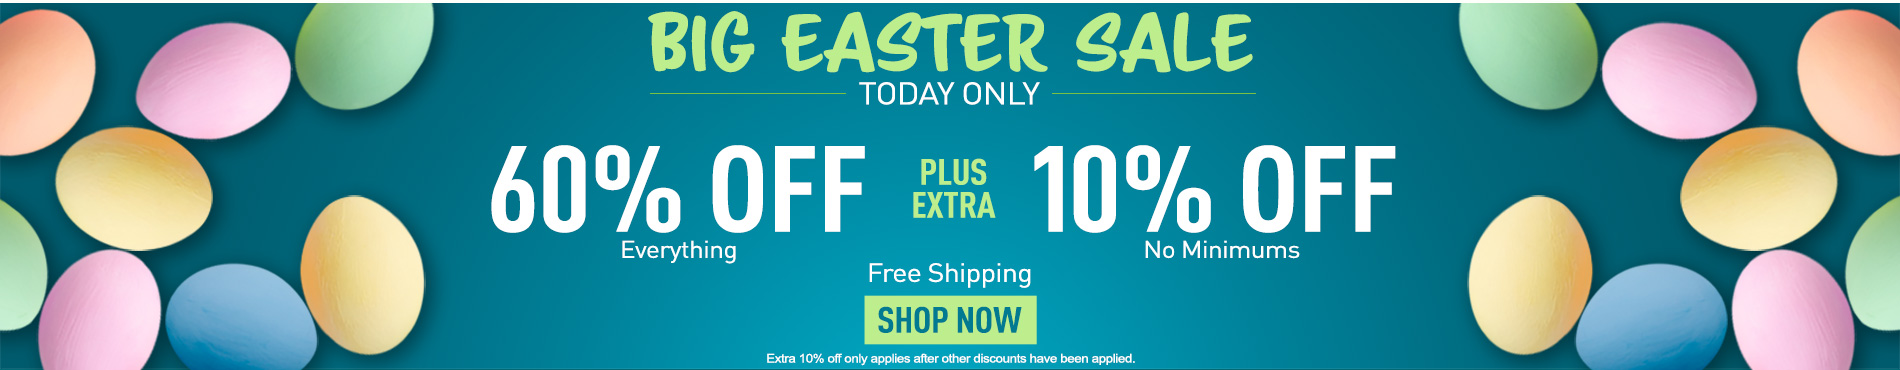 60% off everything + 10% off